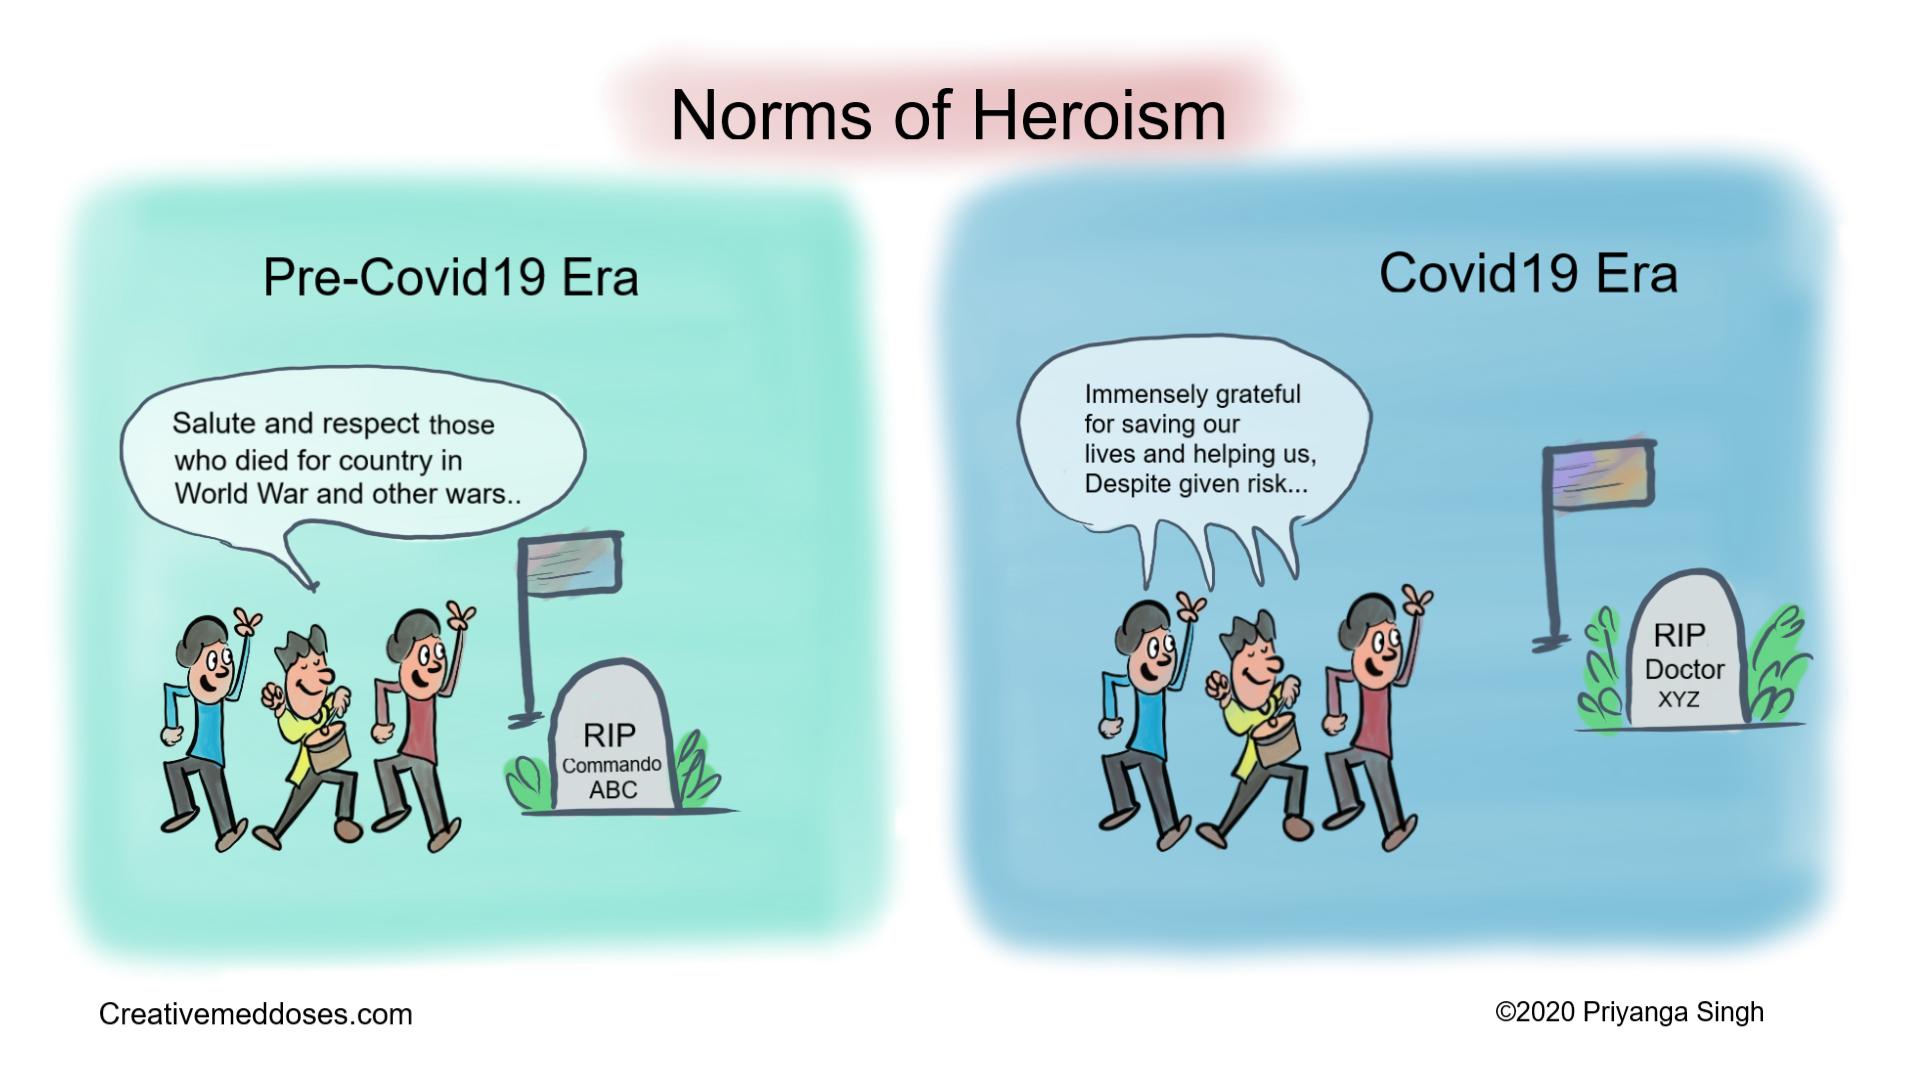 Covid19 Era  changing norms of heroism 